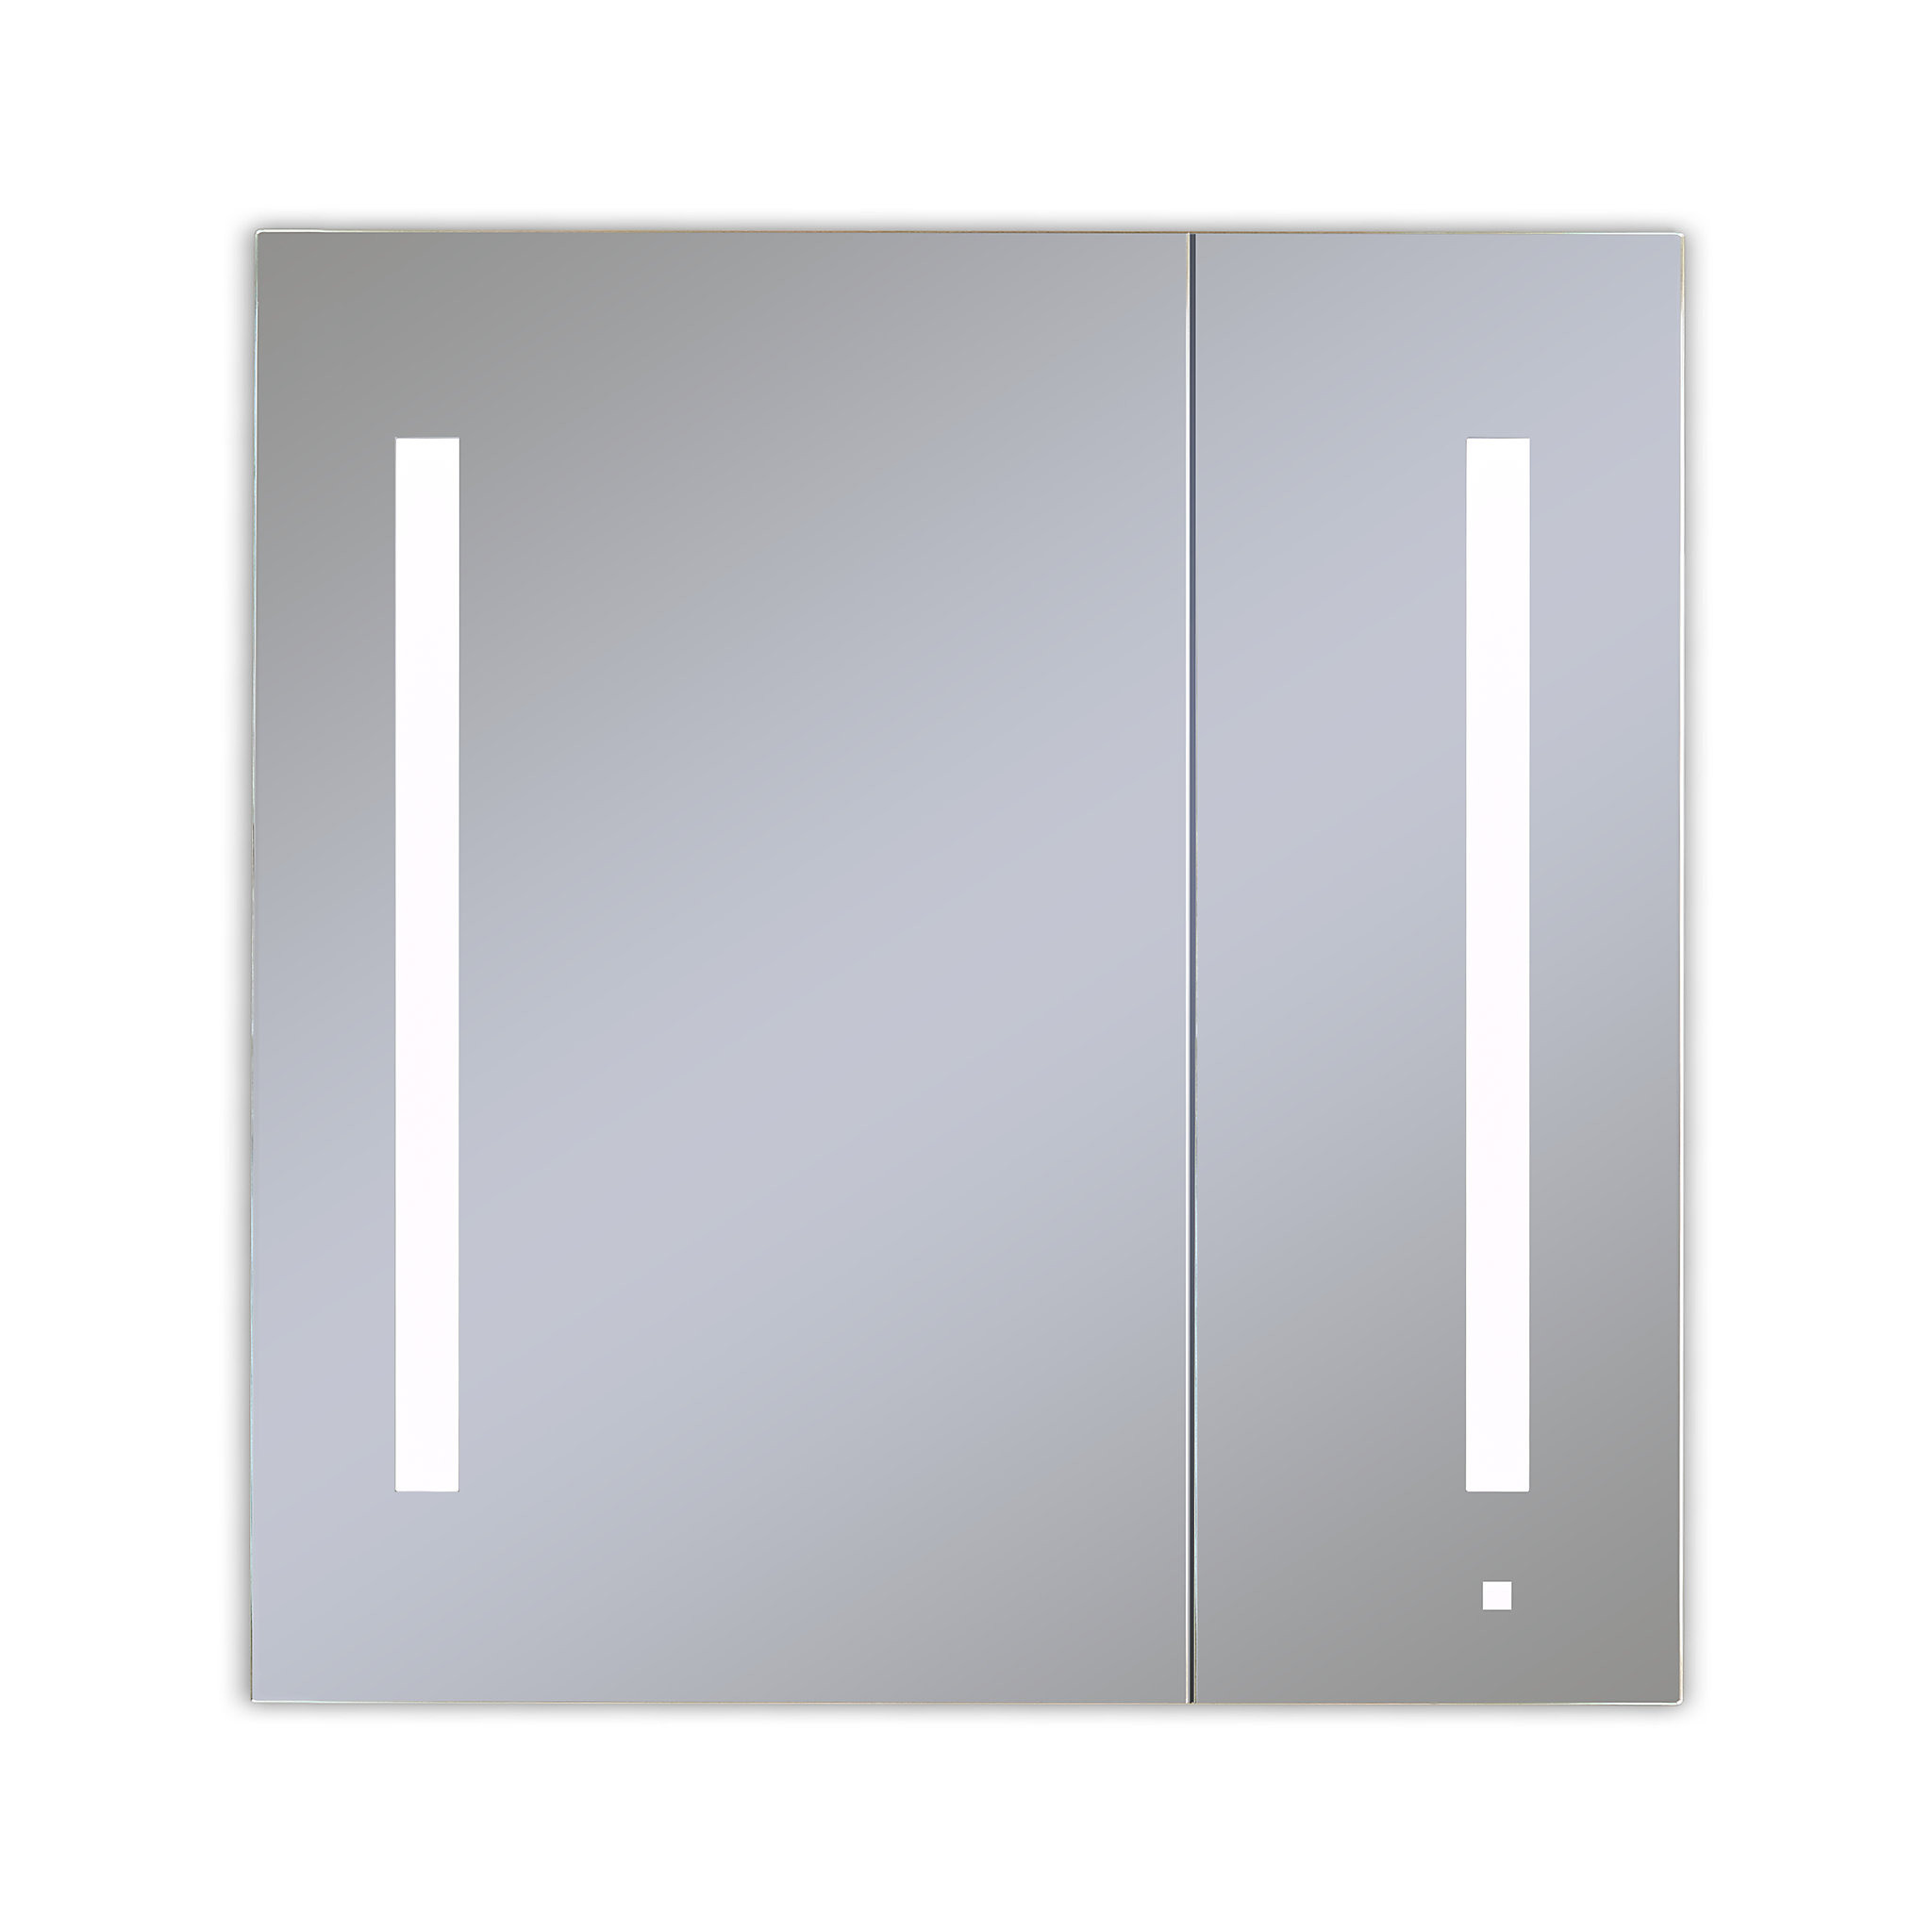 Robern AC3030D4P2L AiO Lighted Cabinet, 30" x 30" x 4", Two Door, LUM Lighting, 4000K Temperature (Cool Light), Dimmable, Electr